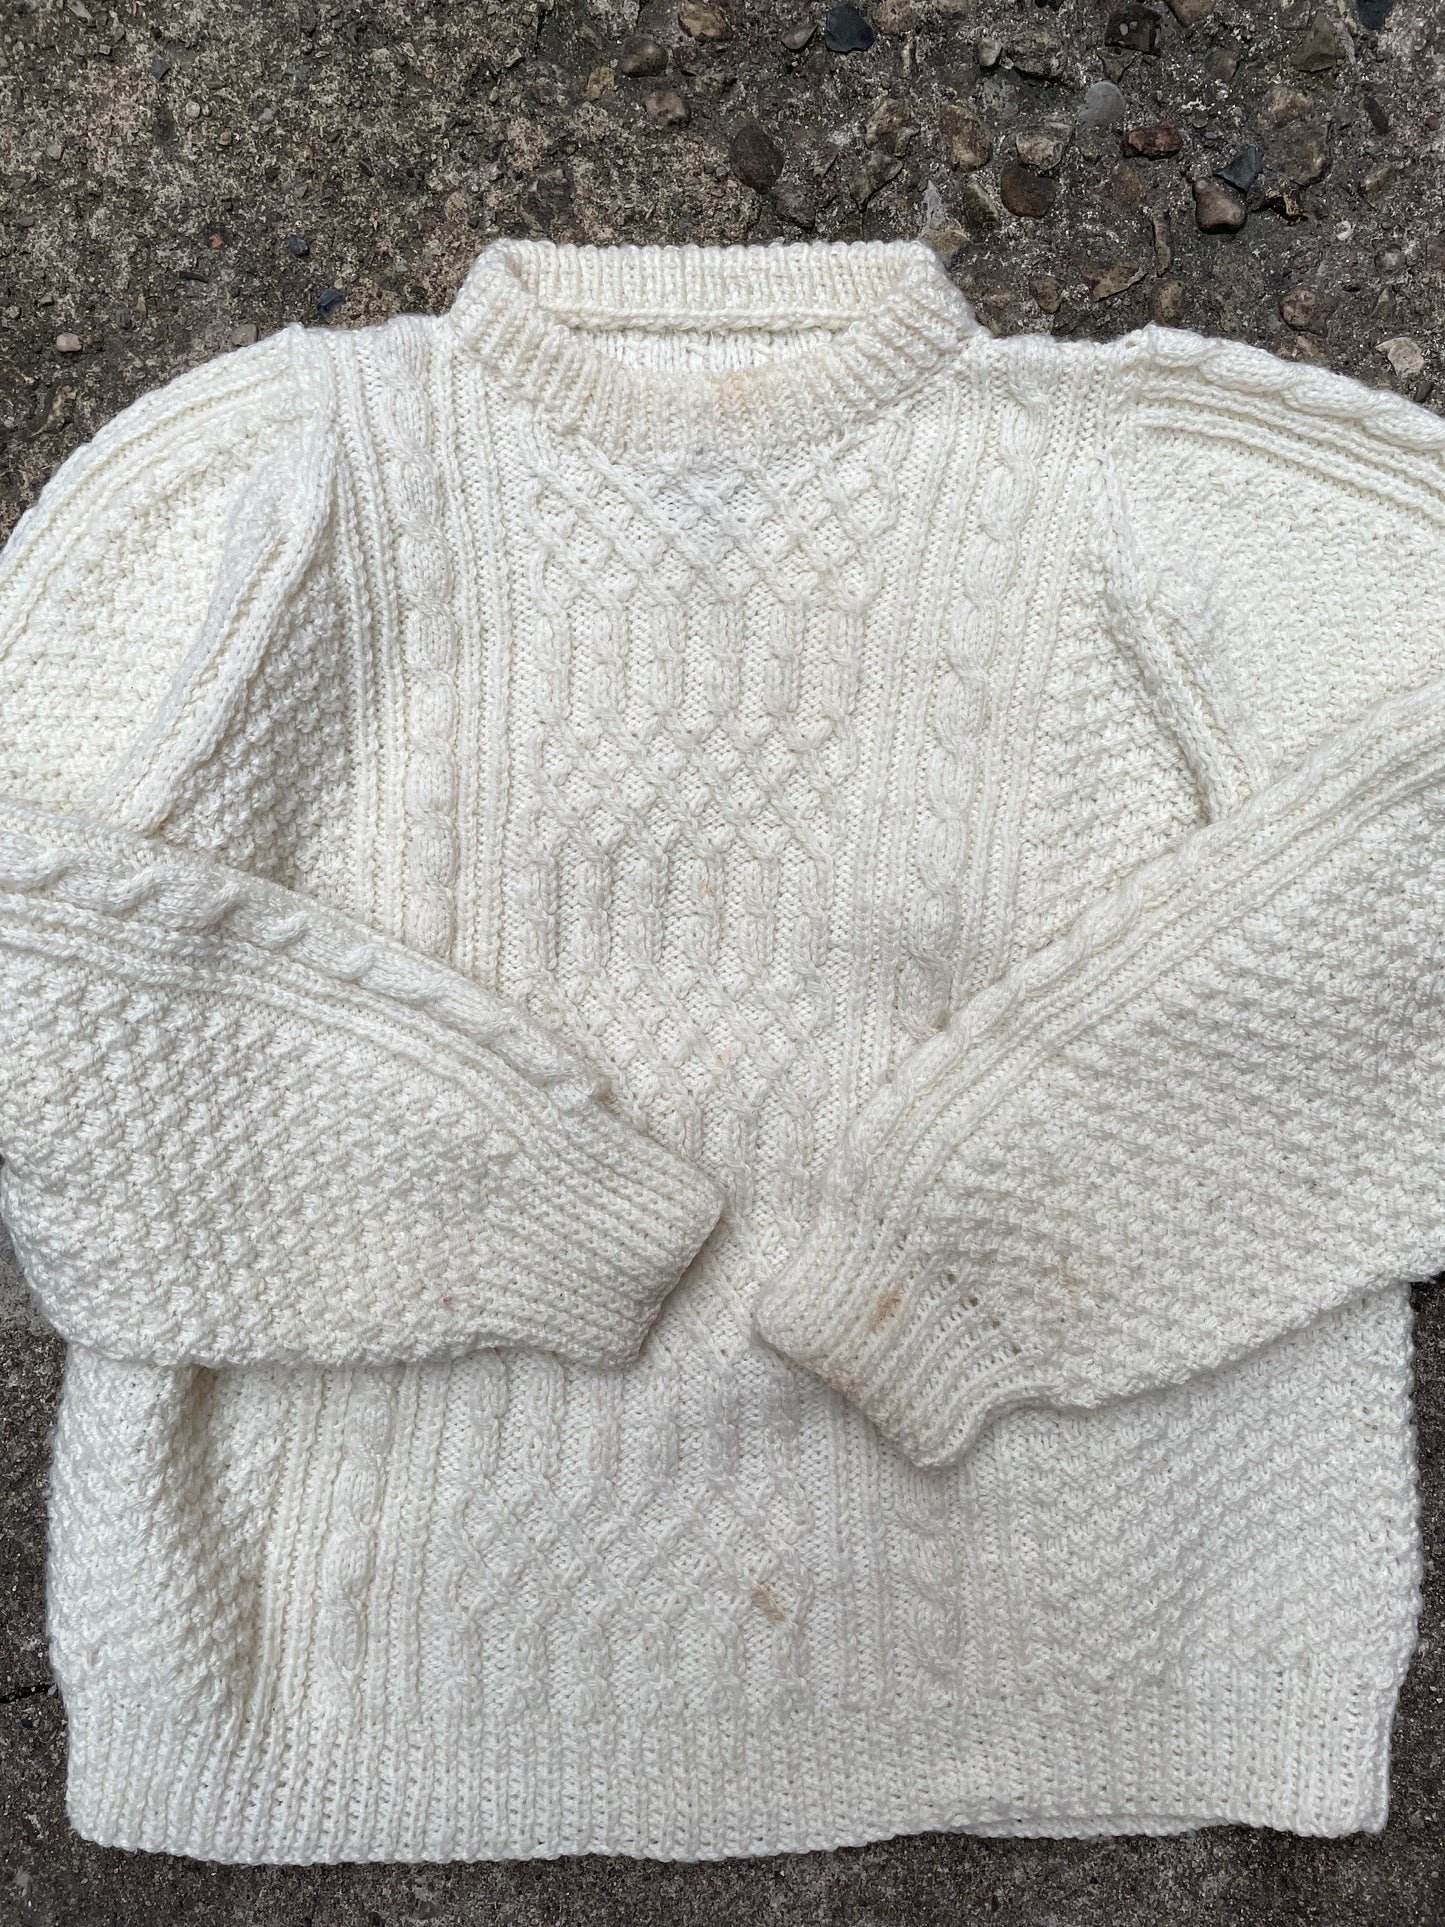 1970's/1980's Cable Knit Fisherman Sweater - L